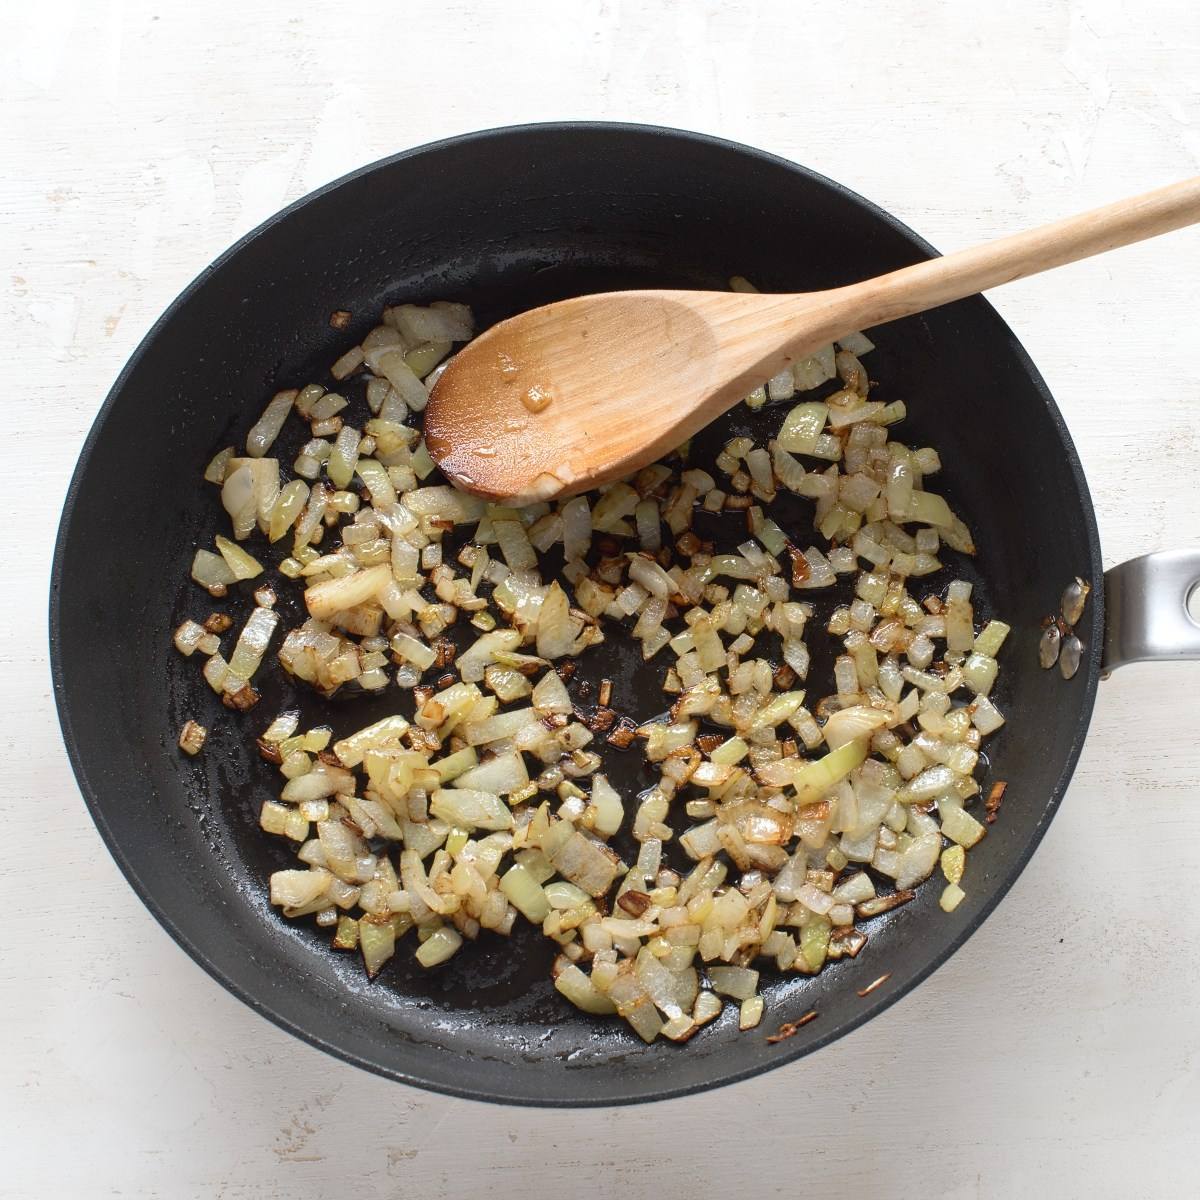 Sauteed onion in a black skillet, with a wooden spoon.